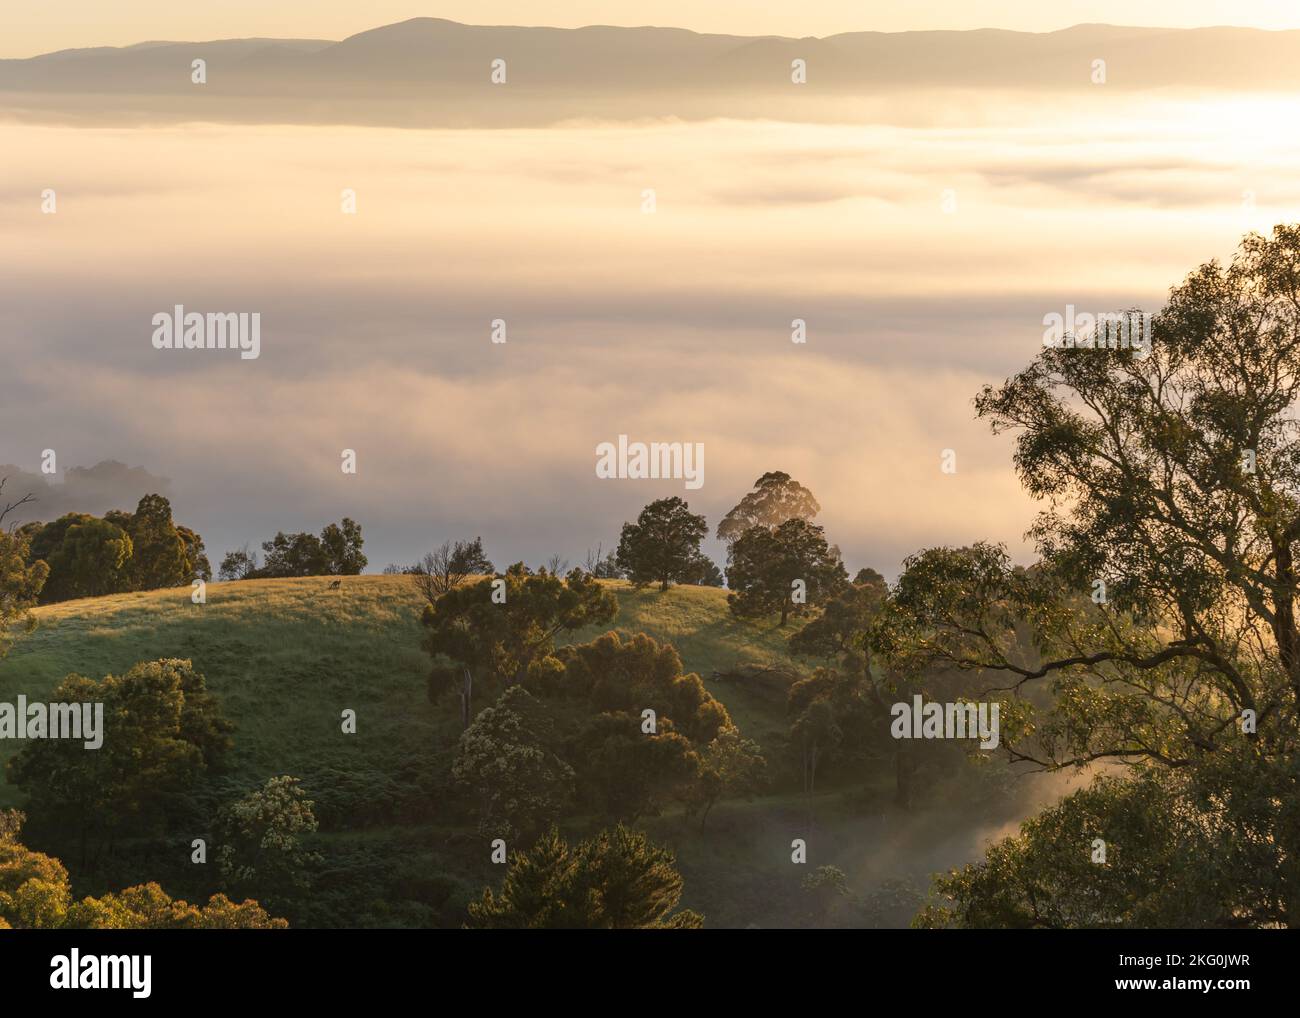 Fog rising up through trees in the foreground and mountains in the distance. Stock Photo